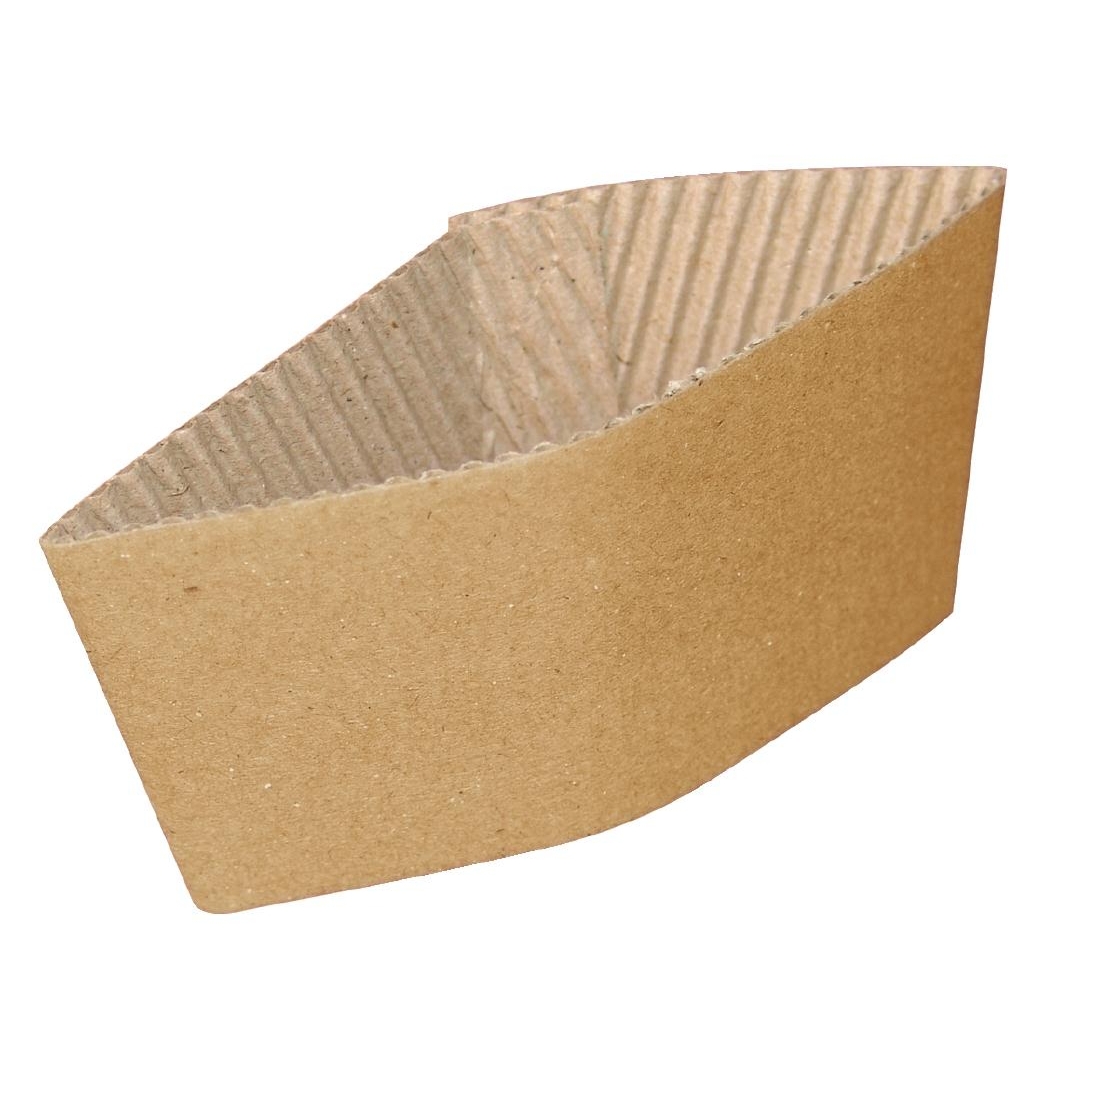 Corrugated Cup Sleeves for 8oz Cup